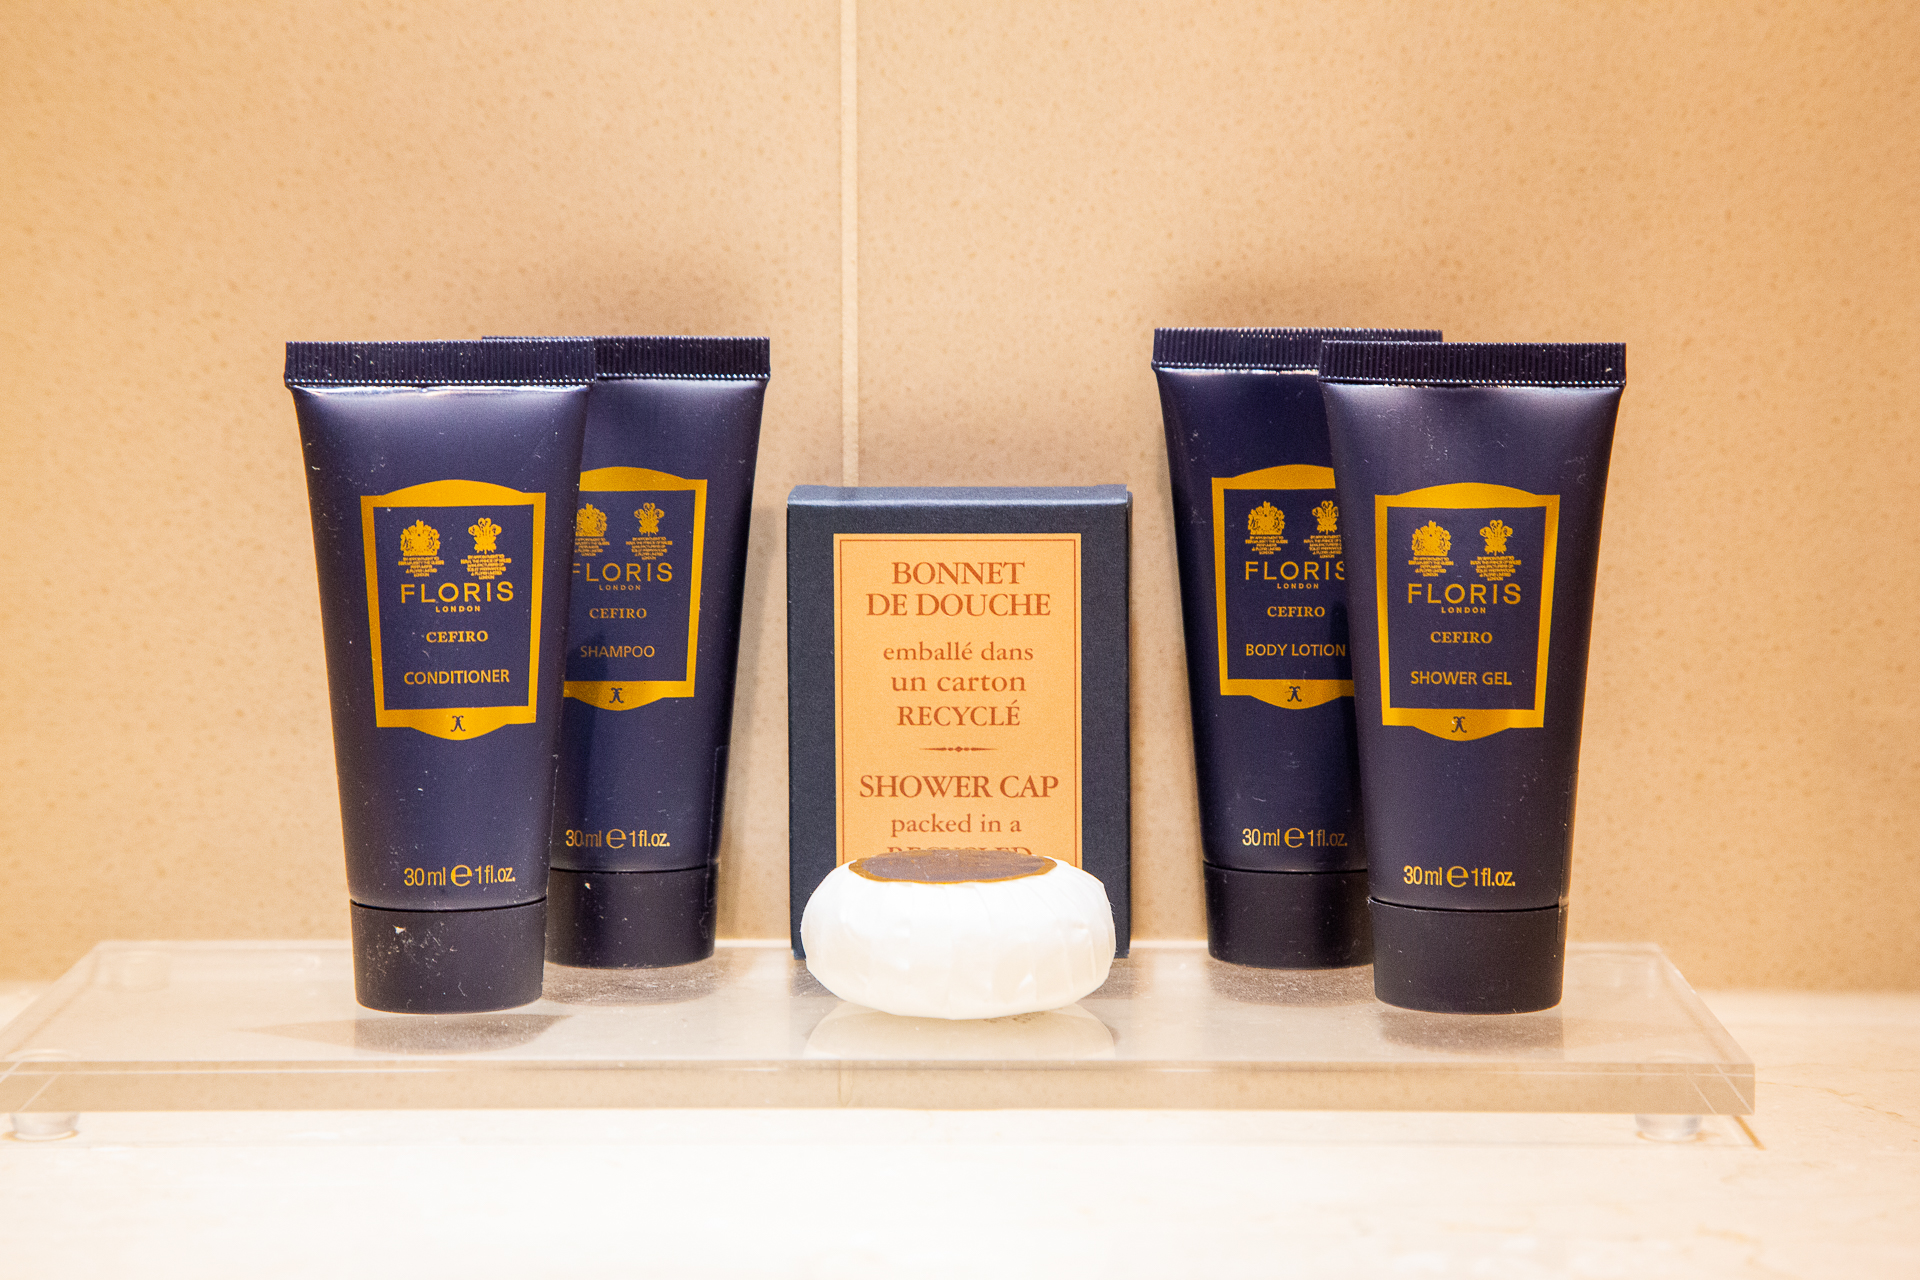 Floris bath lotions at 100 Queen's Gate Hotel in London